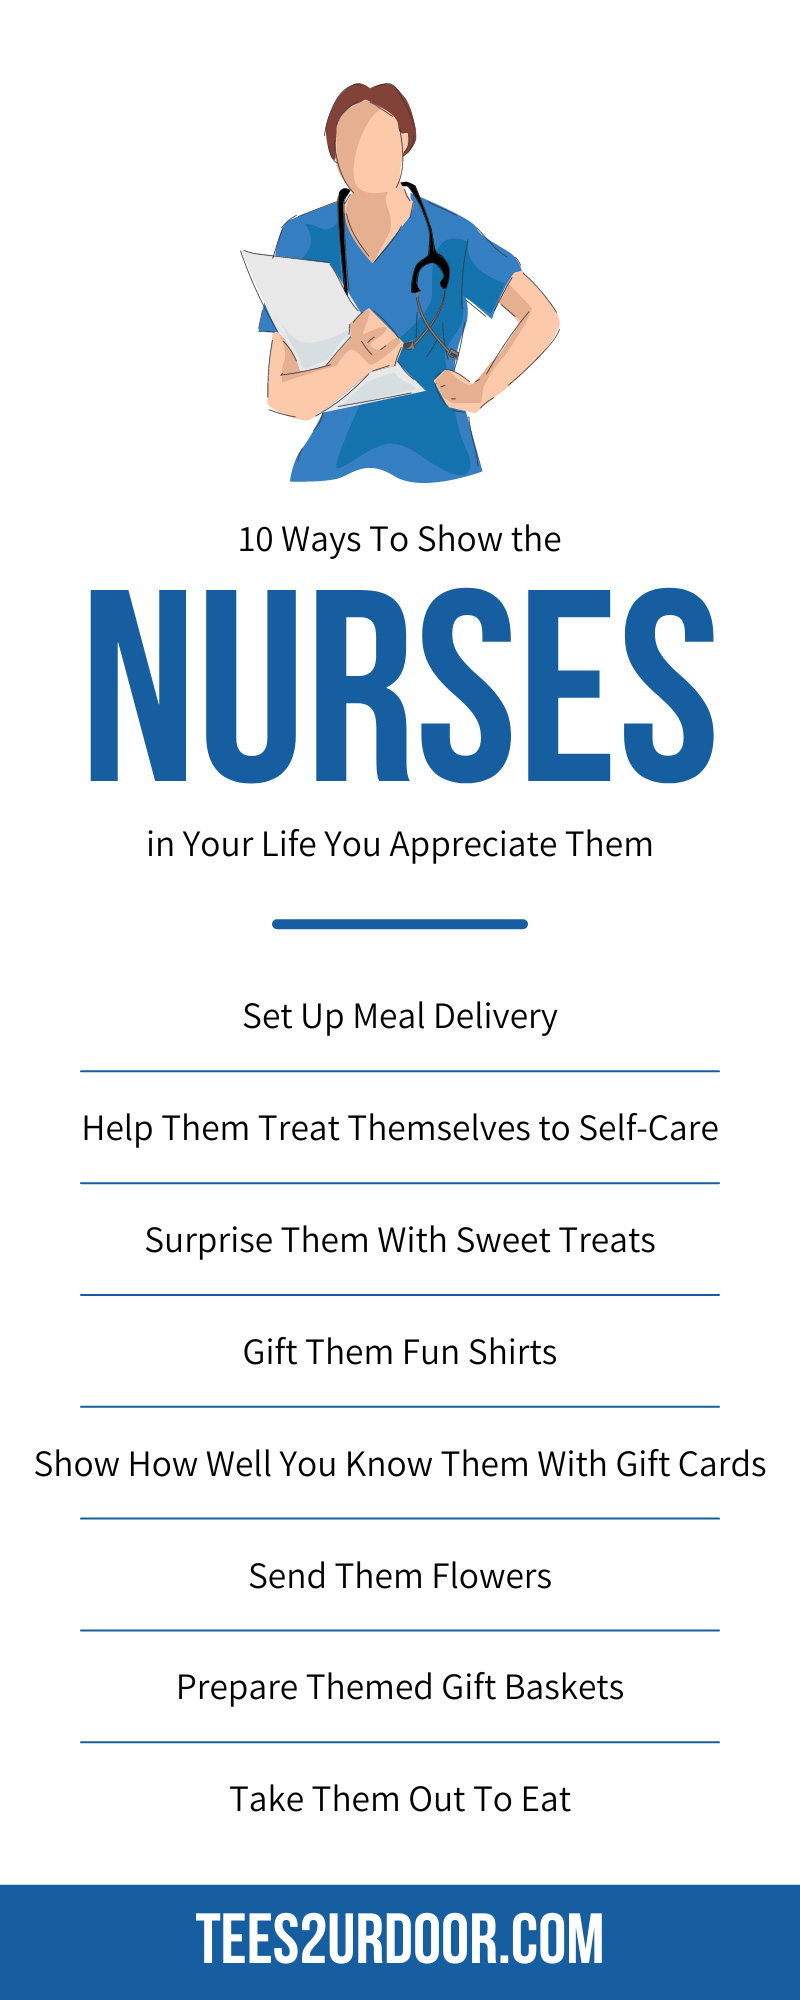 10 Ways To Show the Nurses in Your Life You Appreciate Them